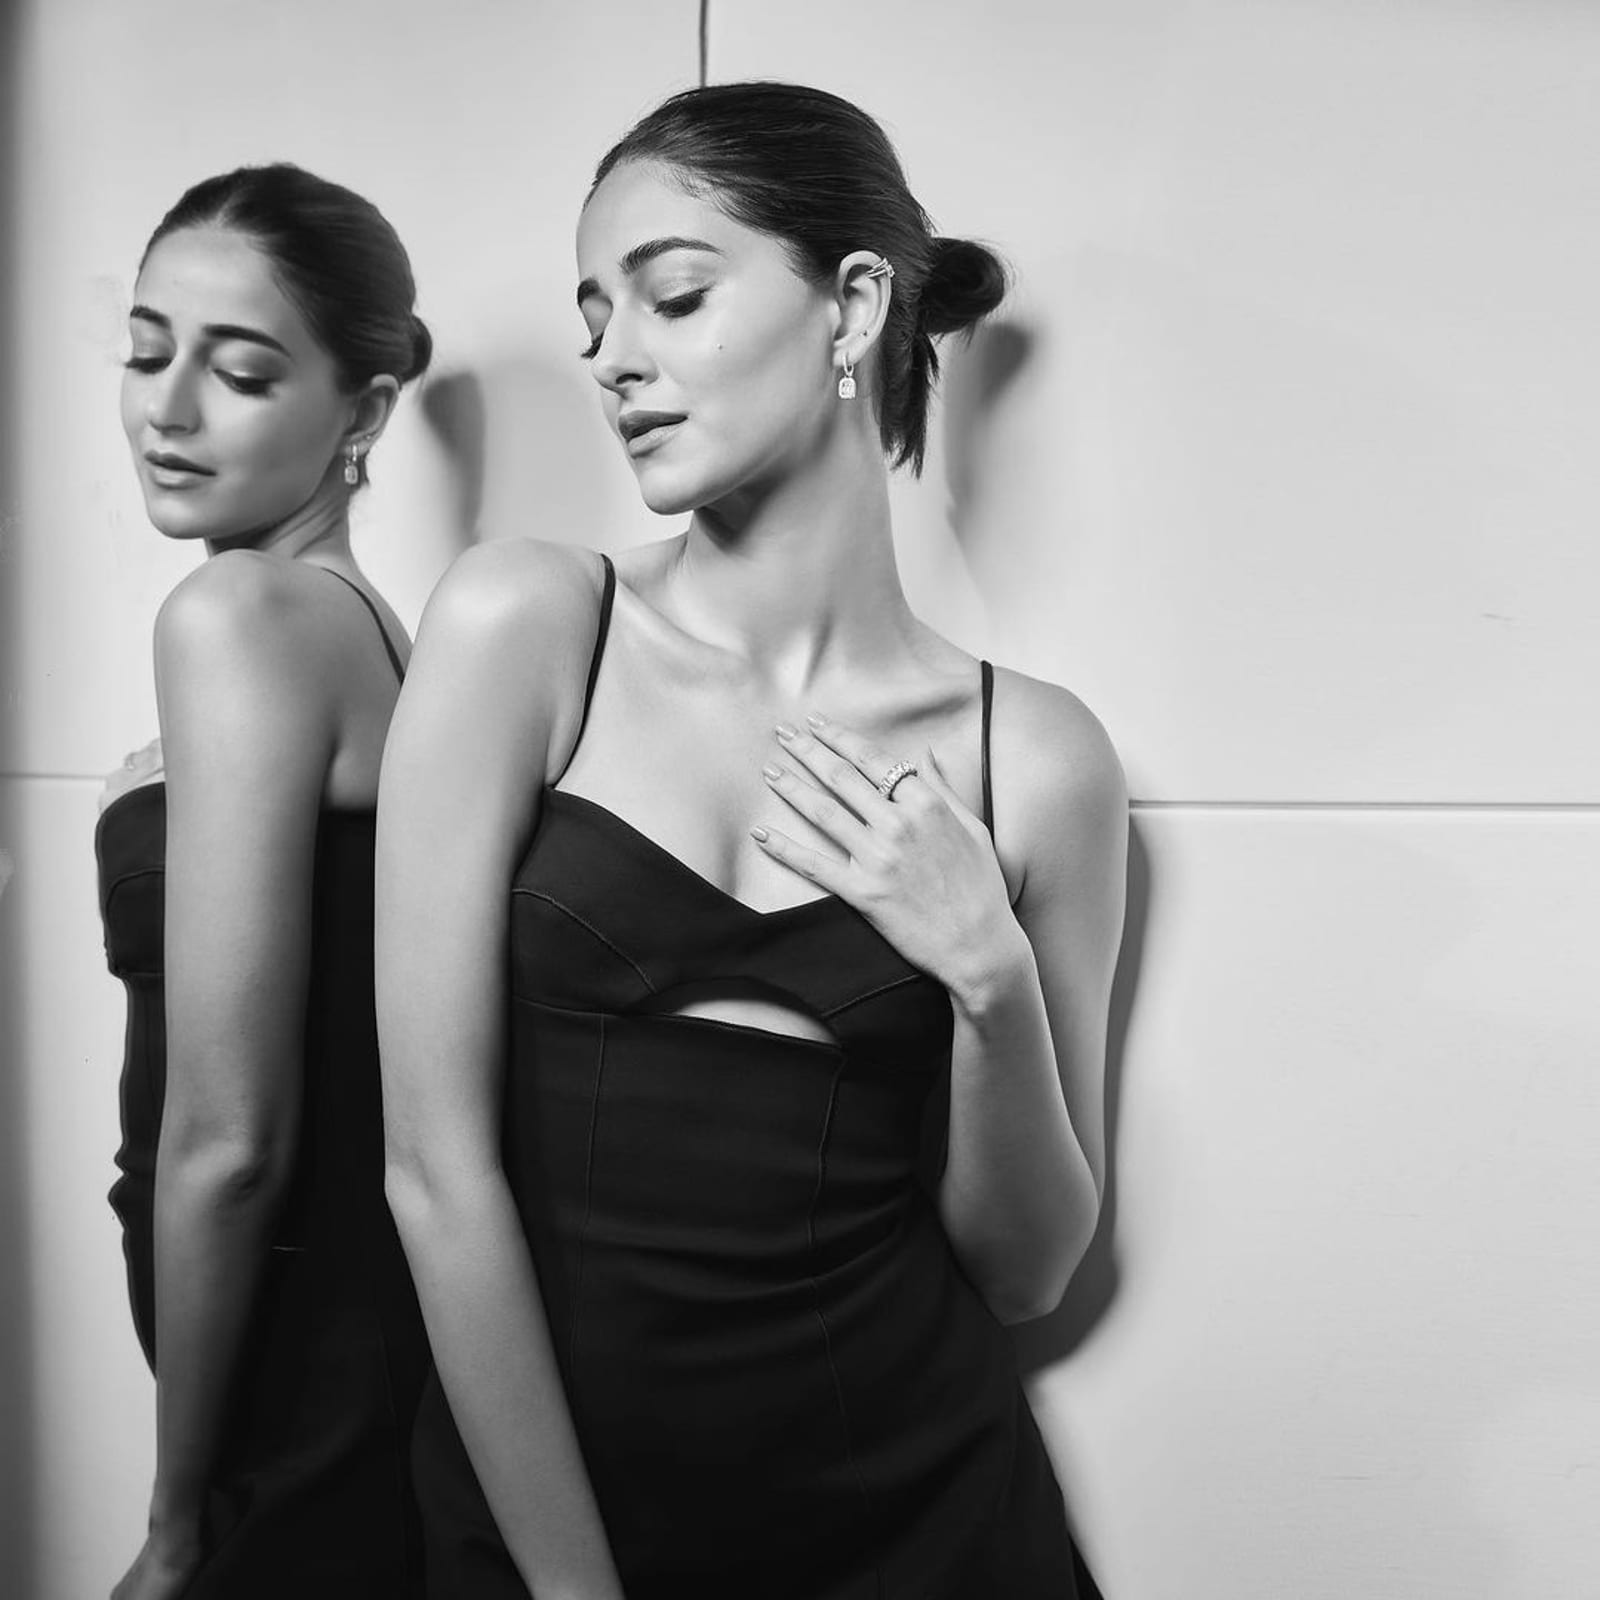 Ananya Panday Gives Her Black Cutout Party Mini Dress A Sporty